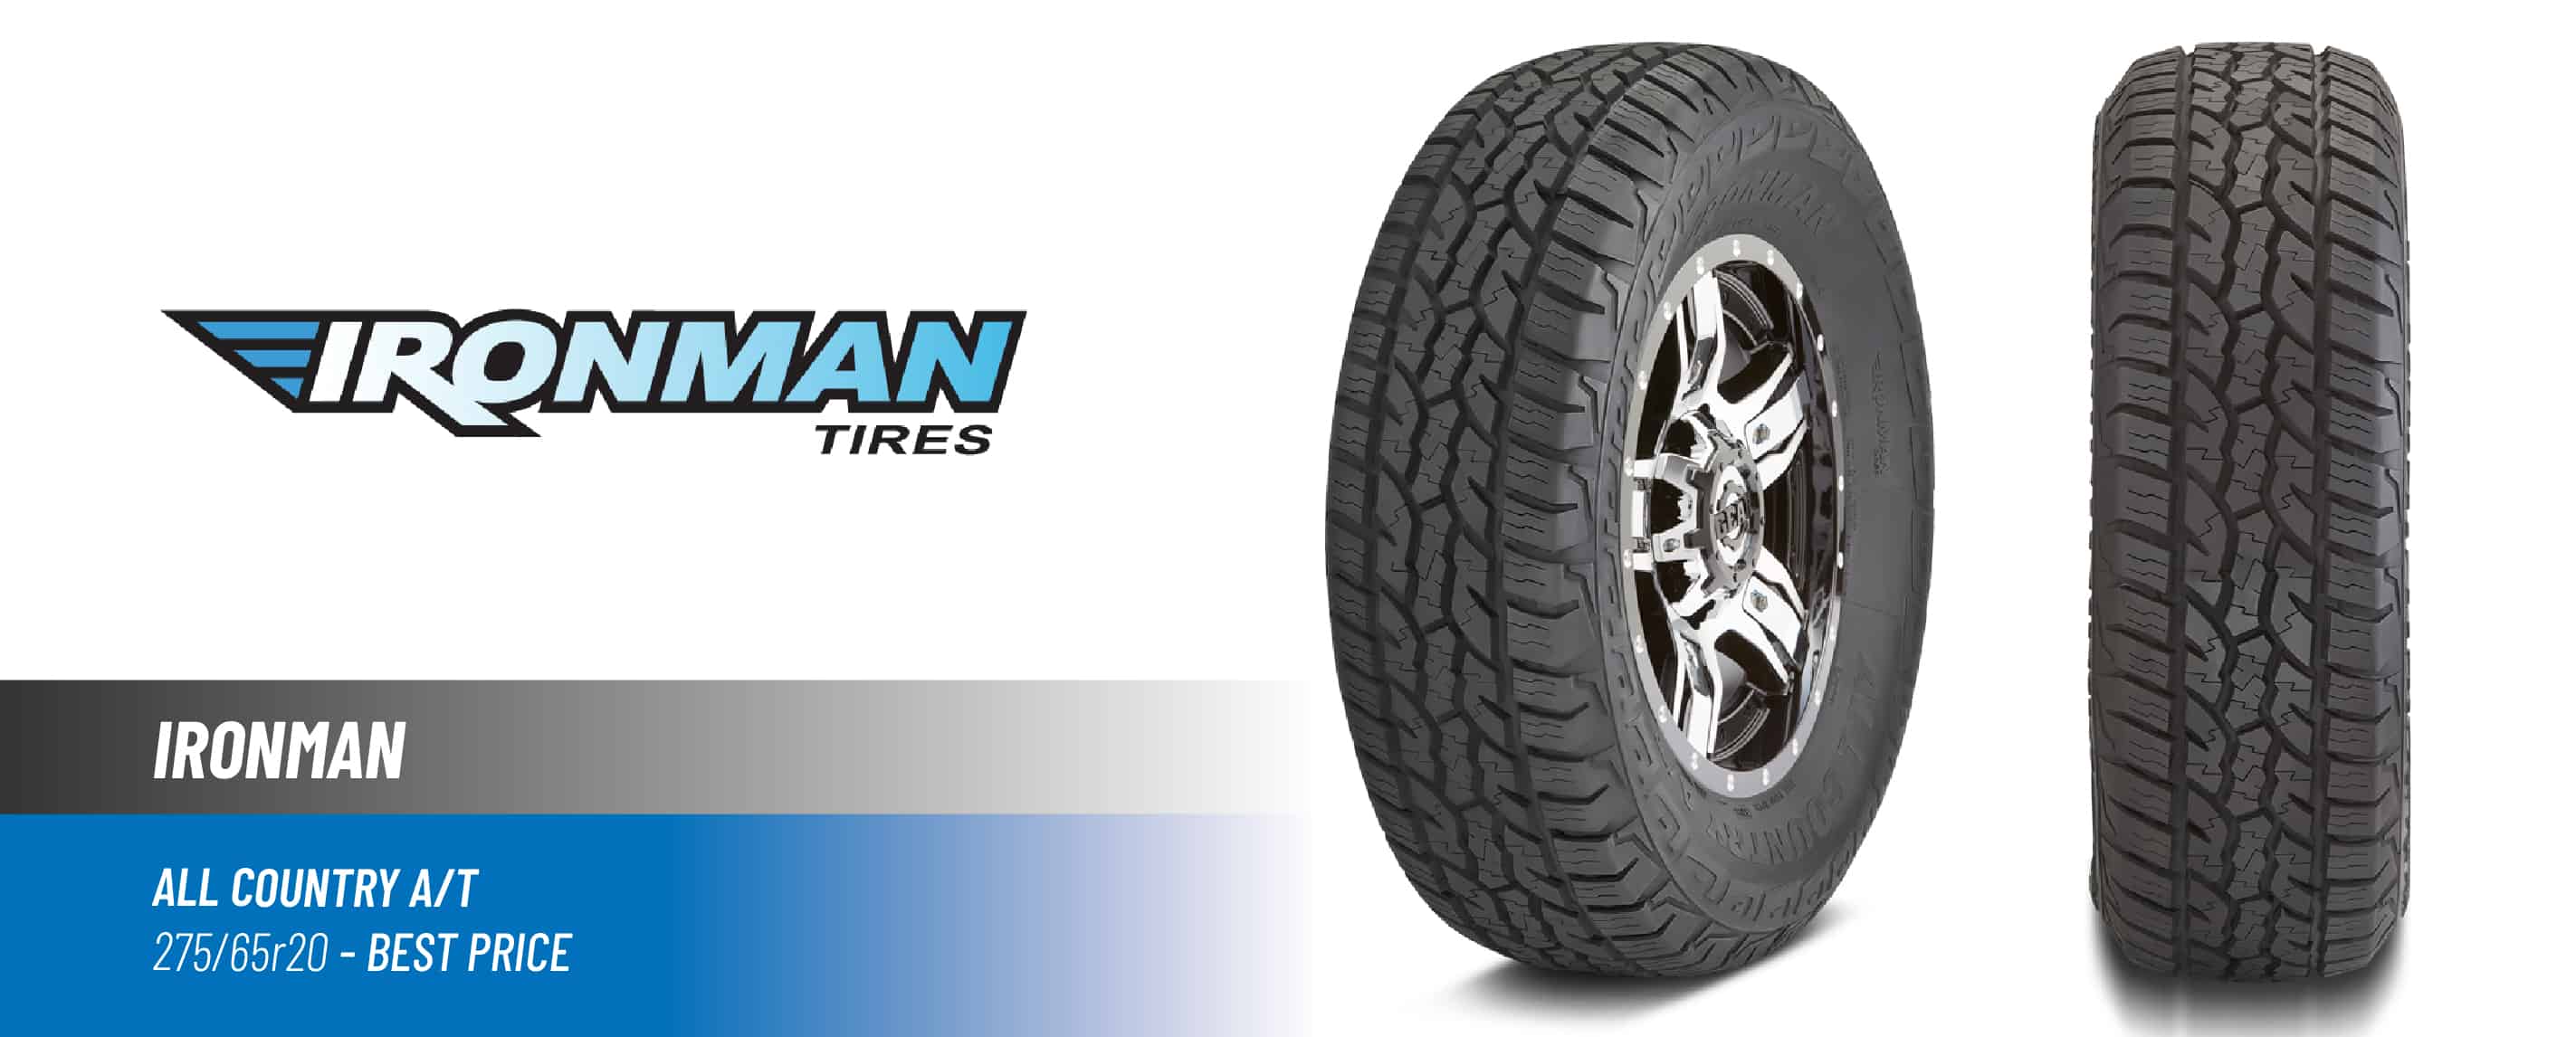 Top#1 Best Price: Ironman All Country A/T – best 275/65r20